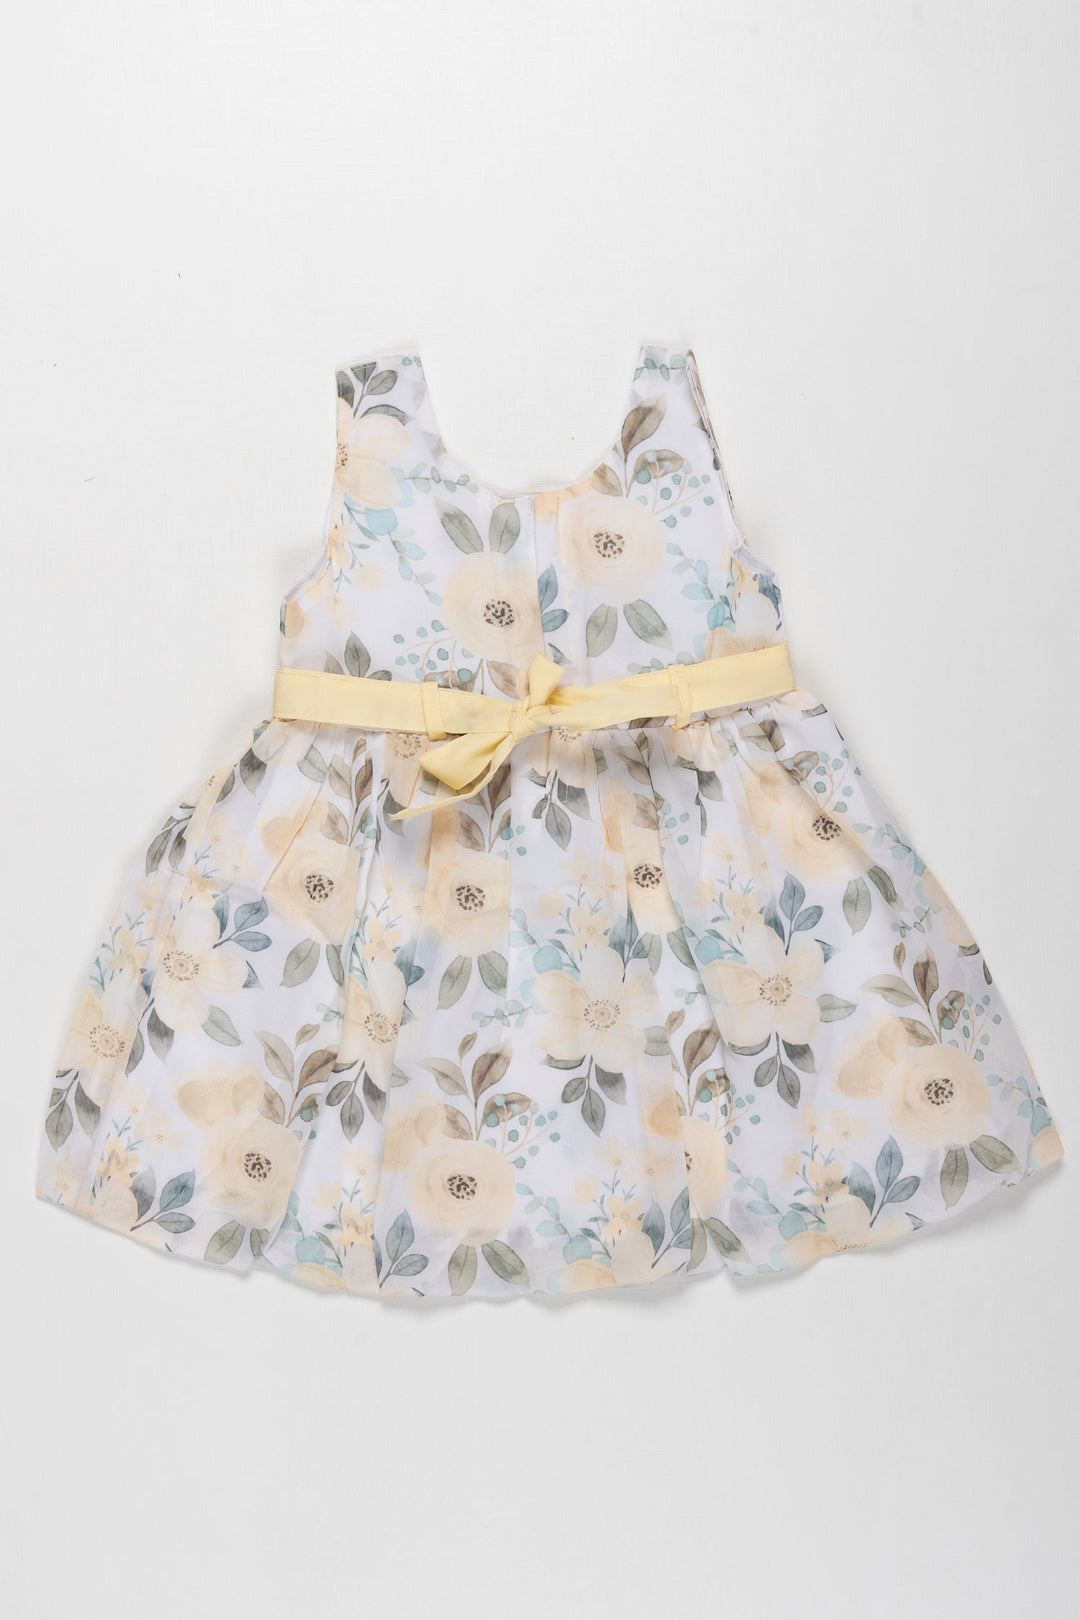 The Nesavu Baby Fancy Frock Sunshine Blossom Yellow Floral Printed Frock for Baby Girls - Garden Party Elegance Nesavu Infant Girls Yellow Floral Cotton Frock | Perfect for Special Occasions | The Nesavu